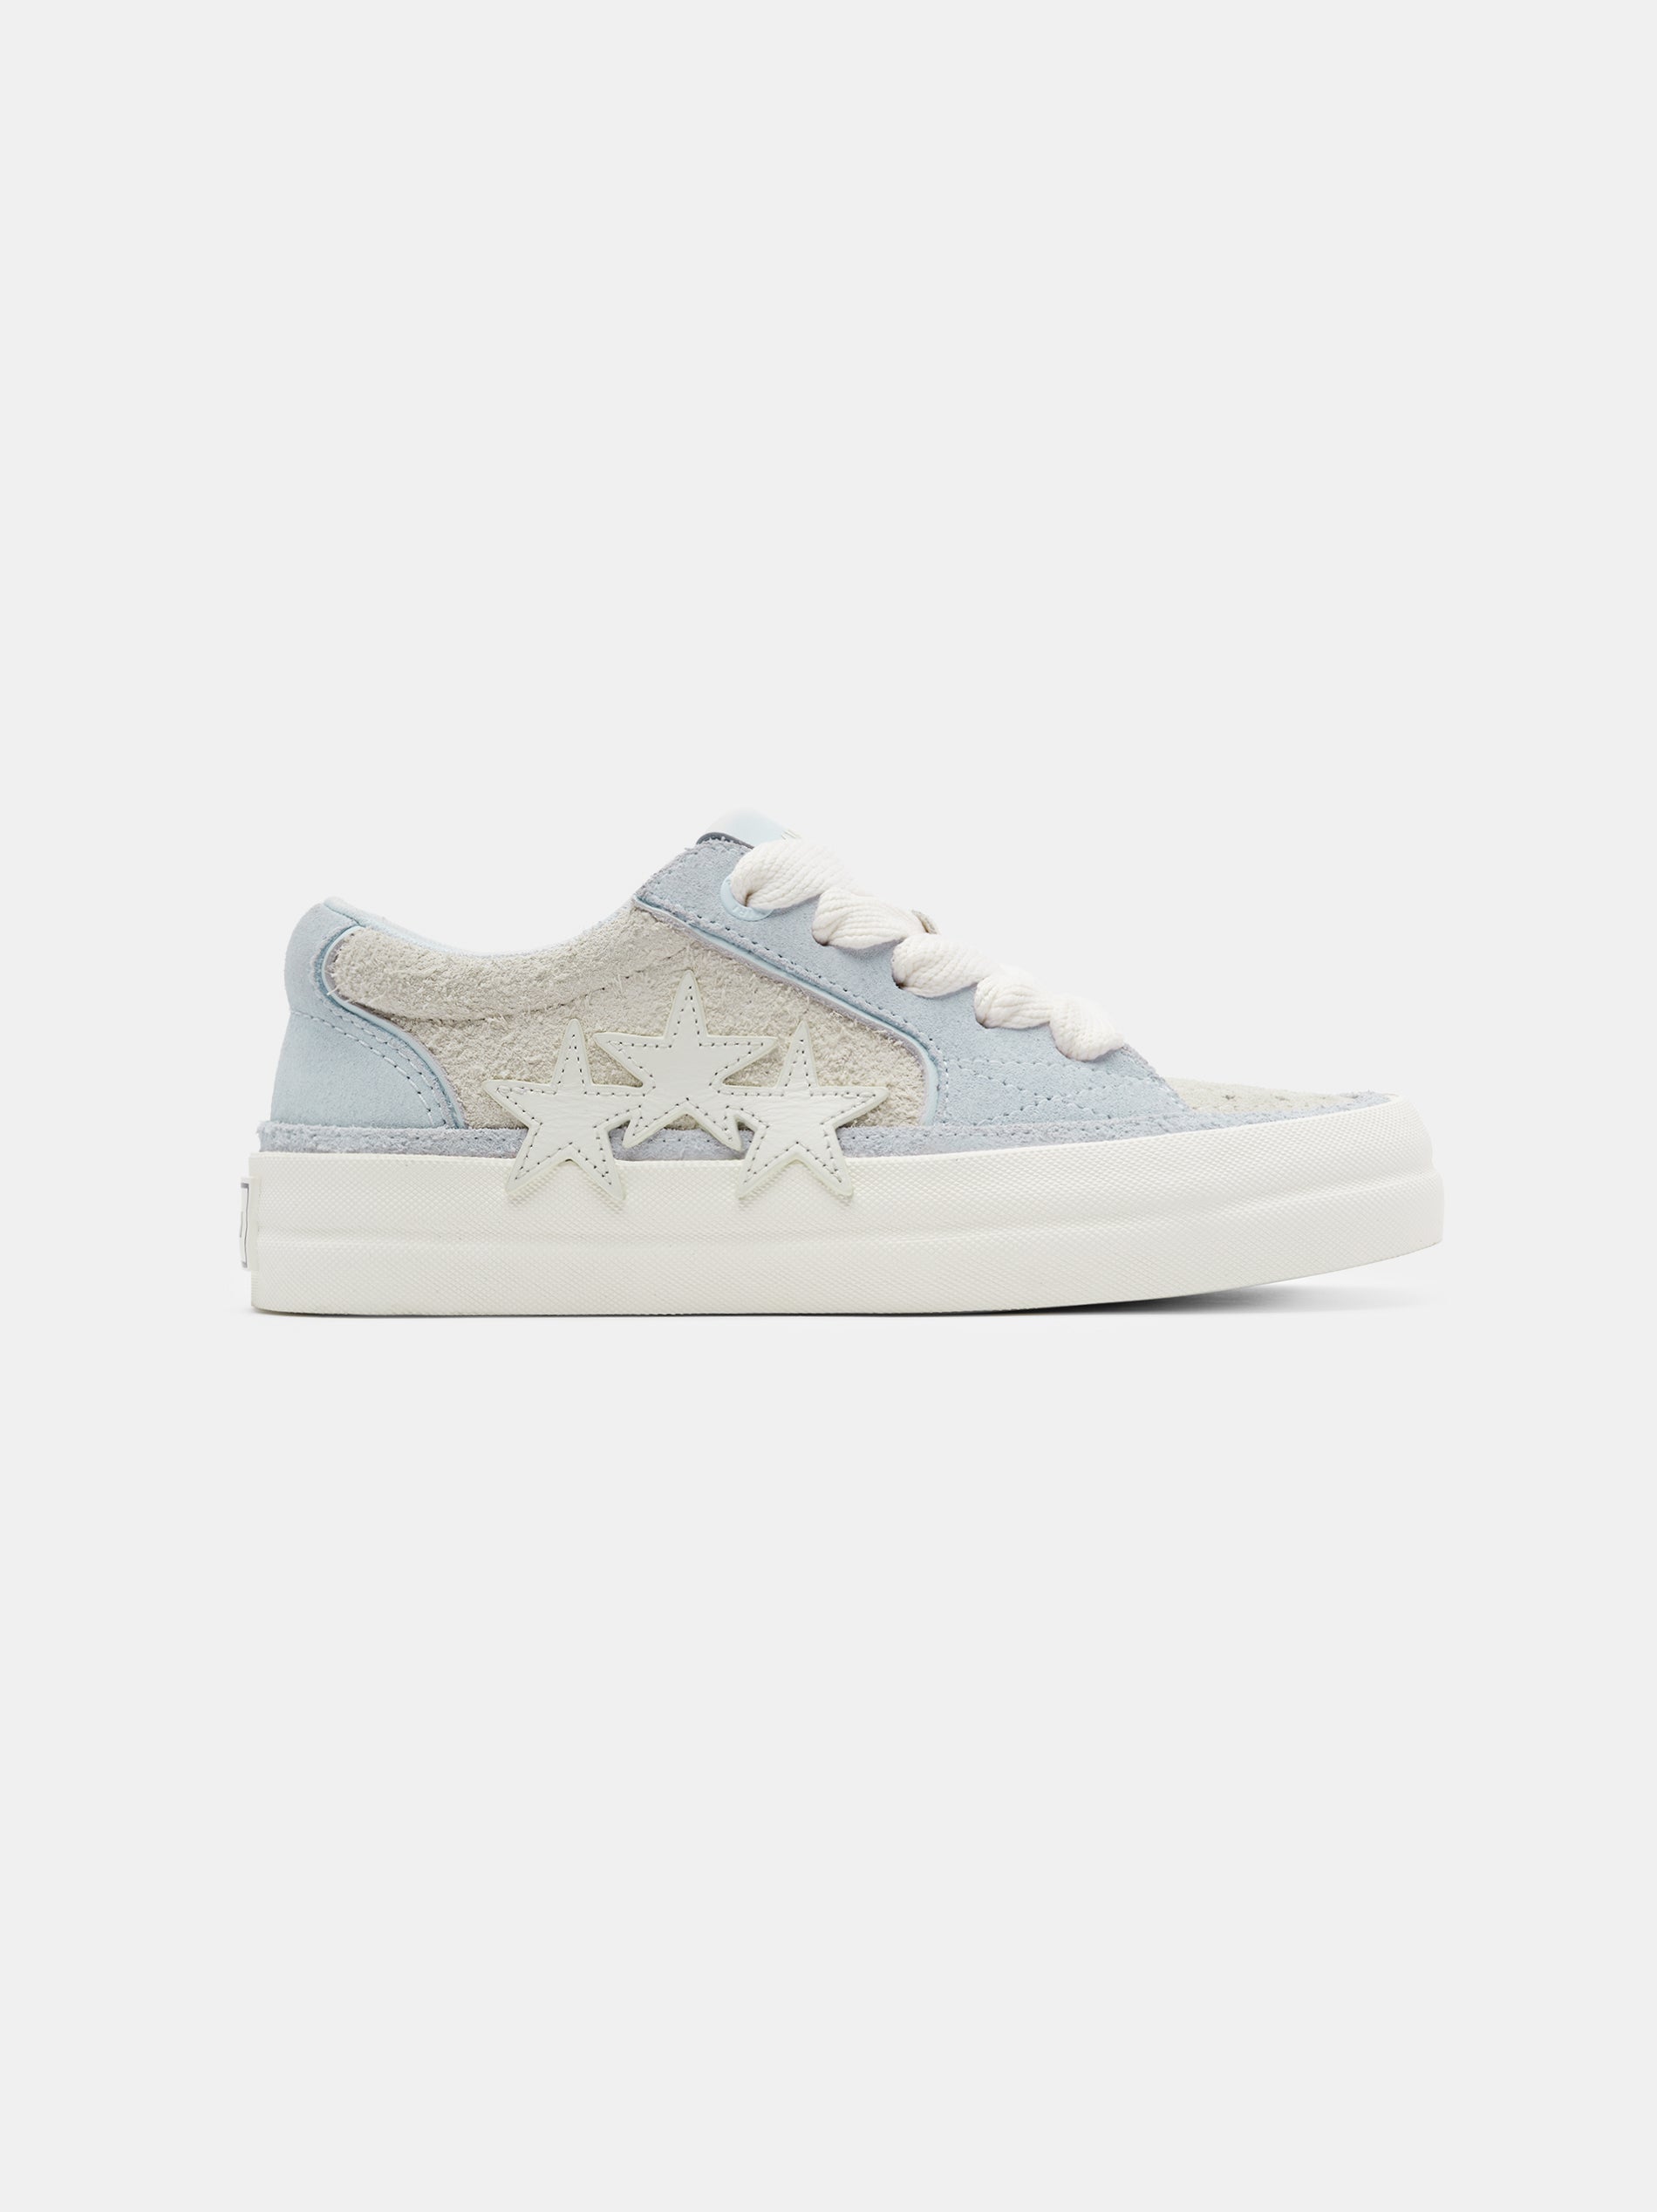 Product WOMEN - SUNSET SKATE LOW - Alabaster Blue featured image